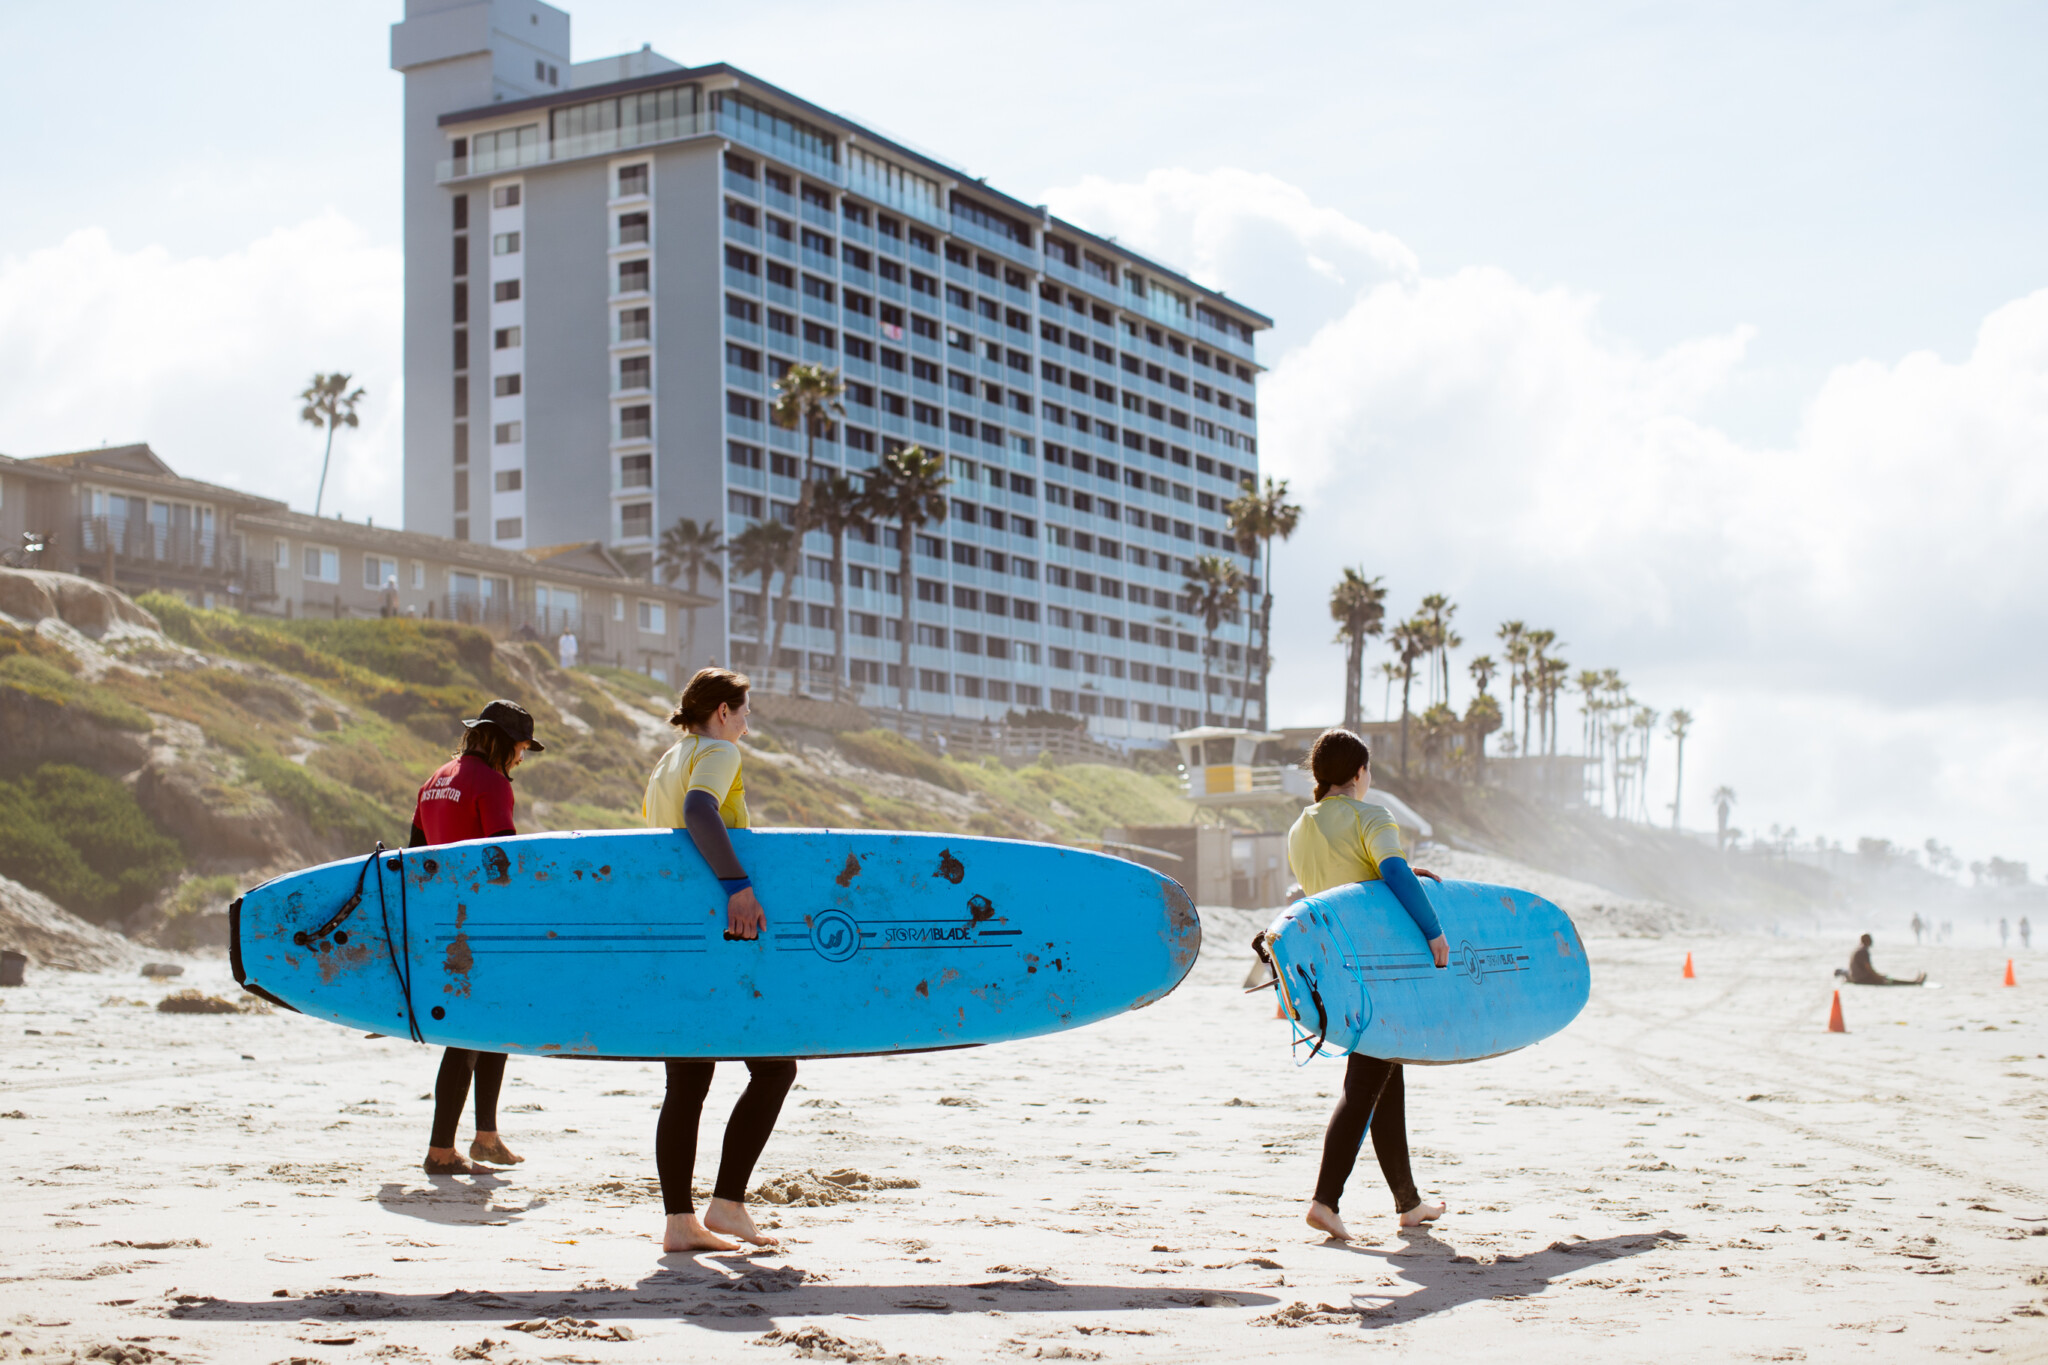 How Surf Lessons Enhance Knowledge and Safety